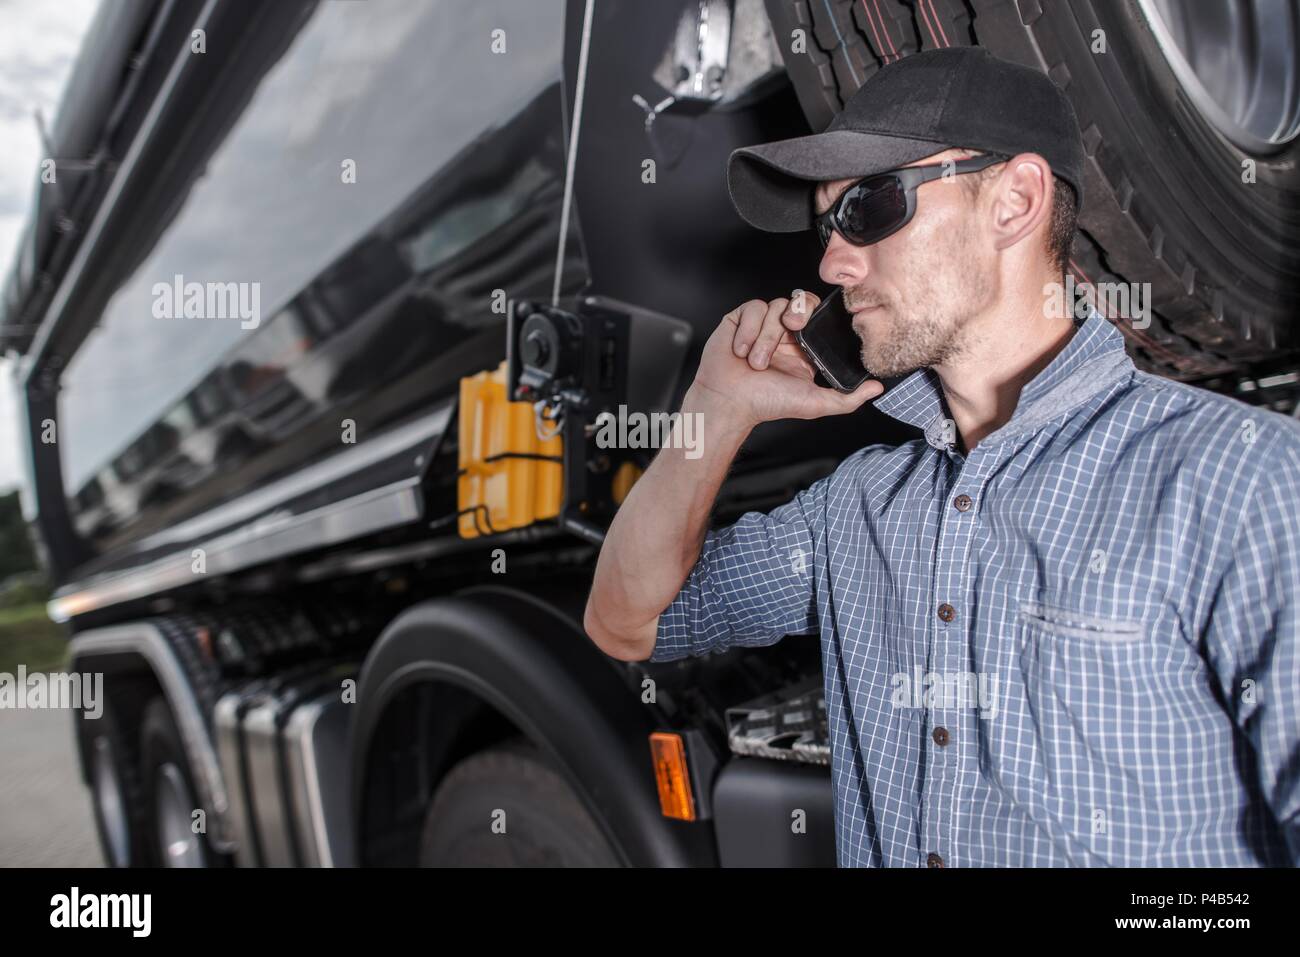 Truck Driver Making Business. Dealing with Potential Clients on the Phone. Heavy Transportation Industry. Stock Photo